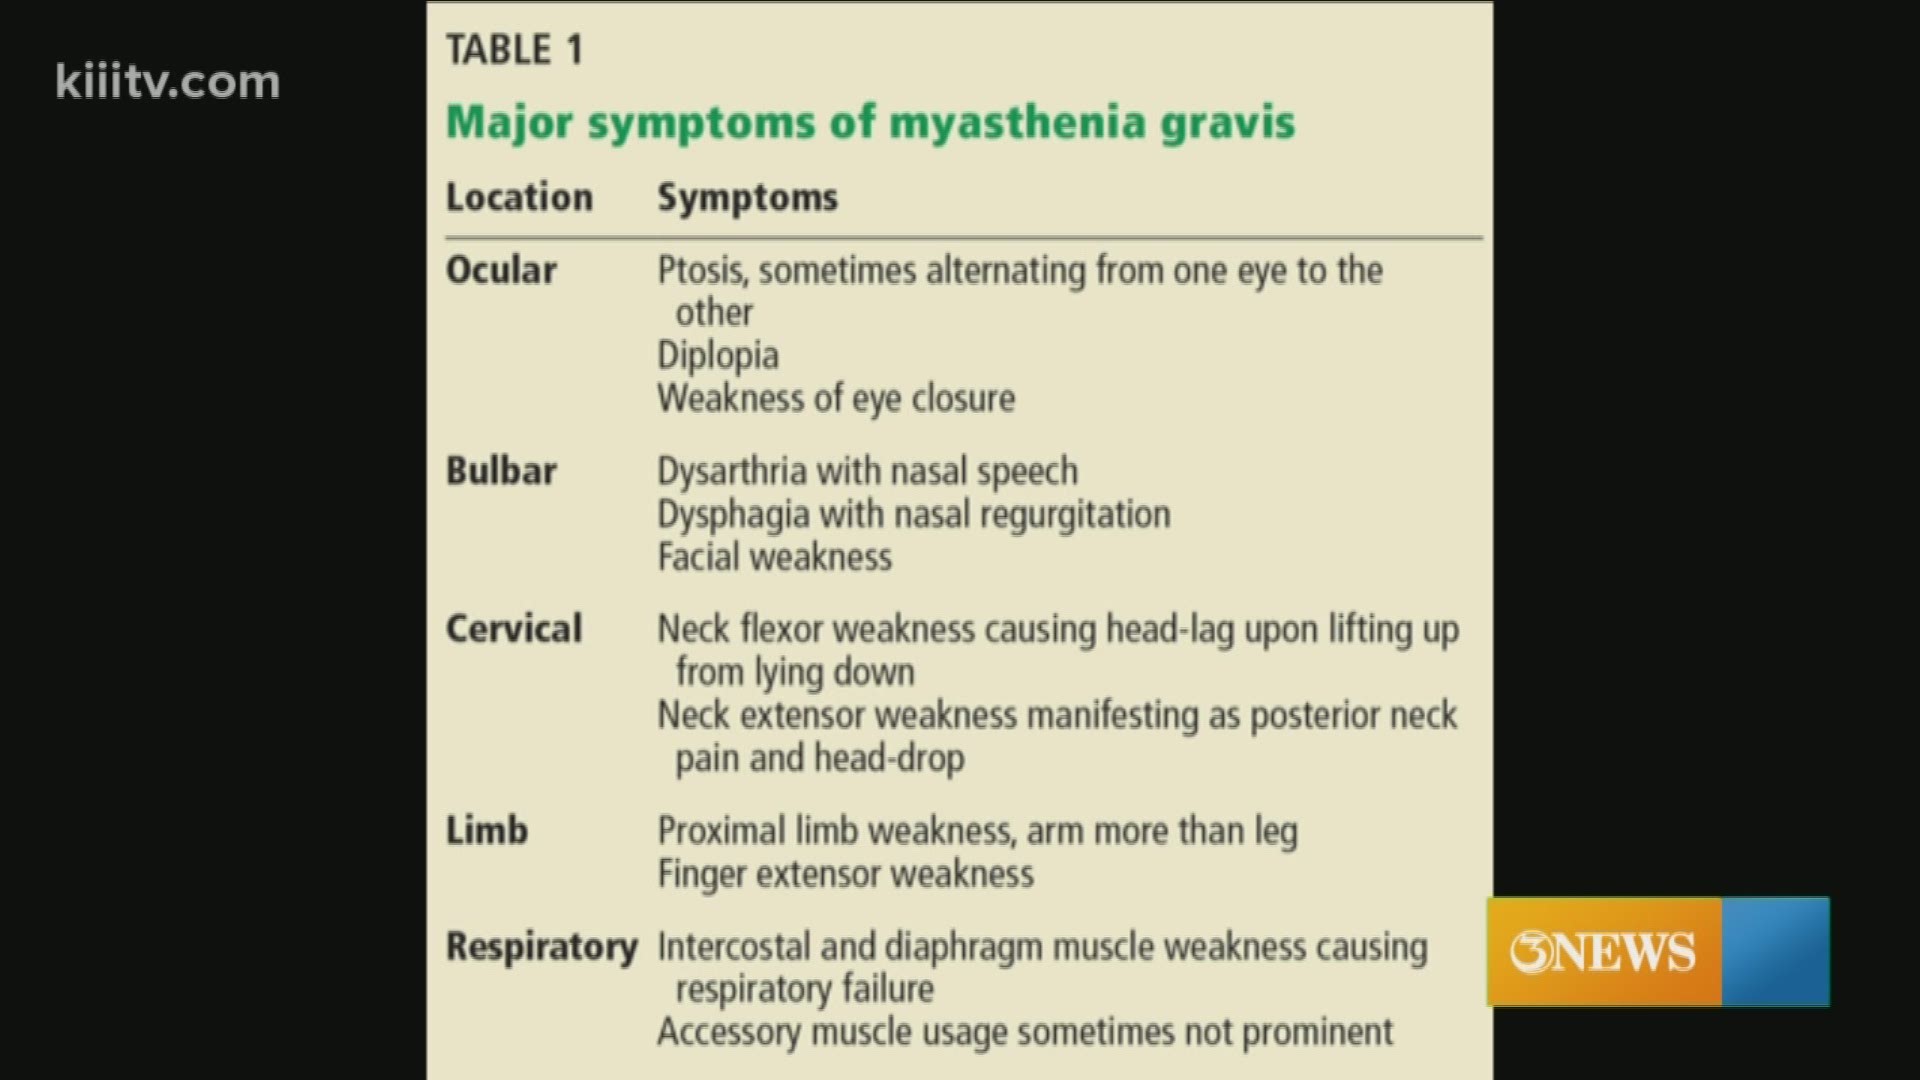 Myasthenia Gravis is an autoimmune issue that can involve weakness in the muscles and fatigue.